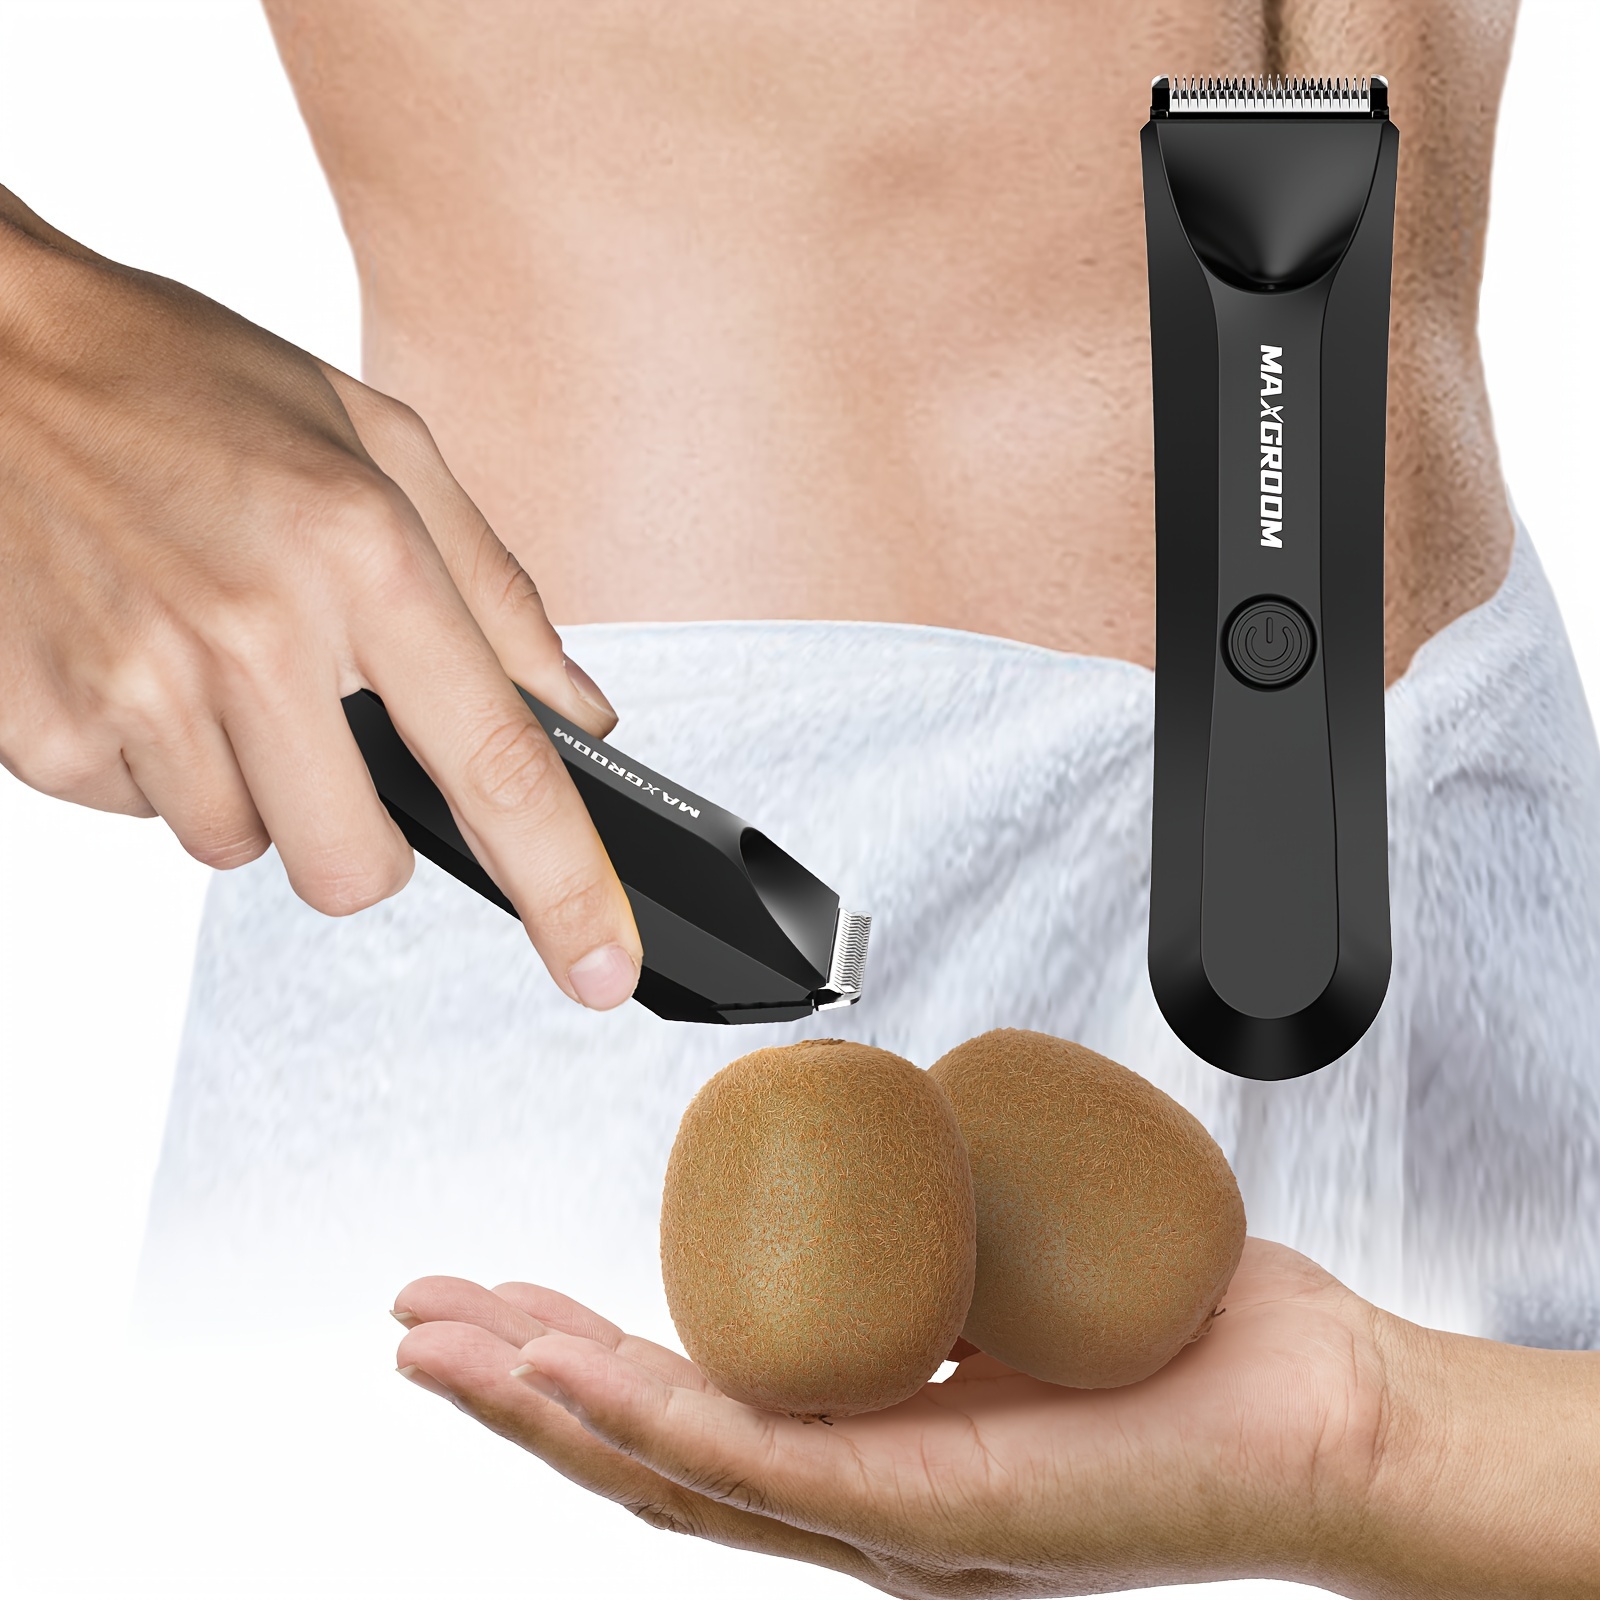 

Body Hair Trimmer Shaver For Men Ball Trimmer For Groin Pubic Replaceable Ceramic Blade Electric Razor Gifts For Men